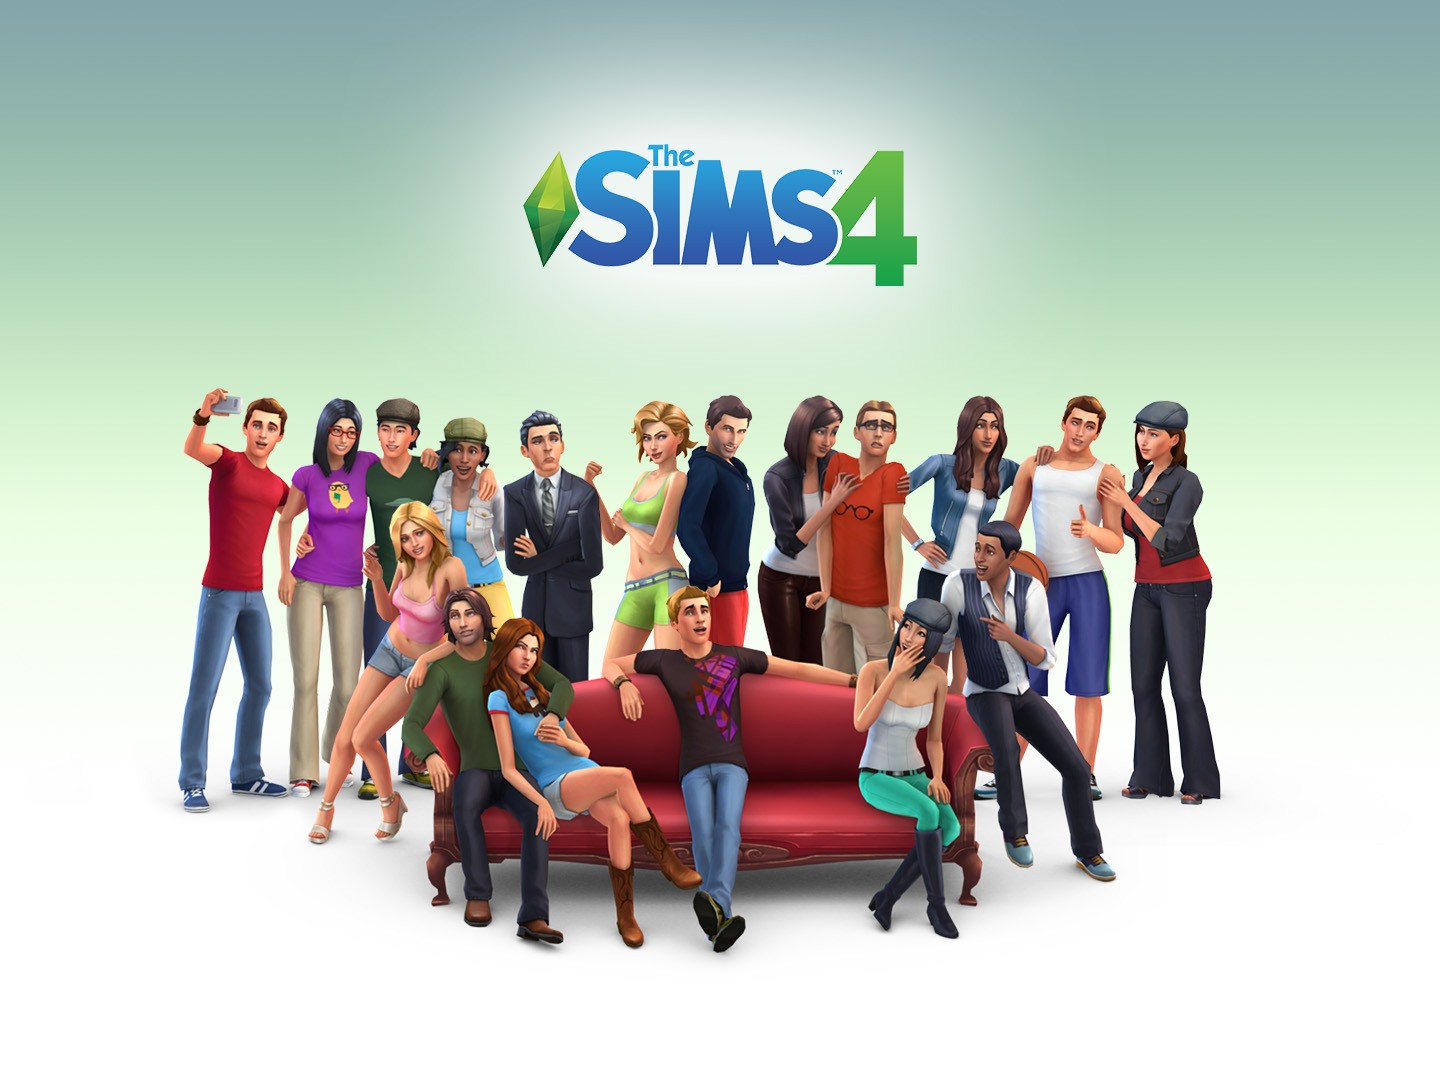 Amazing The Sims 4 Pictures & Backgrounds